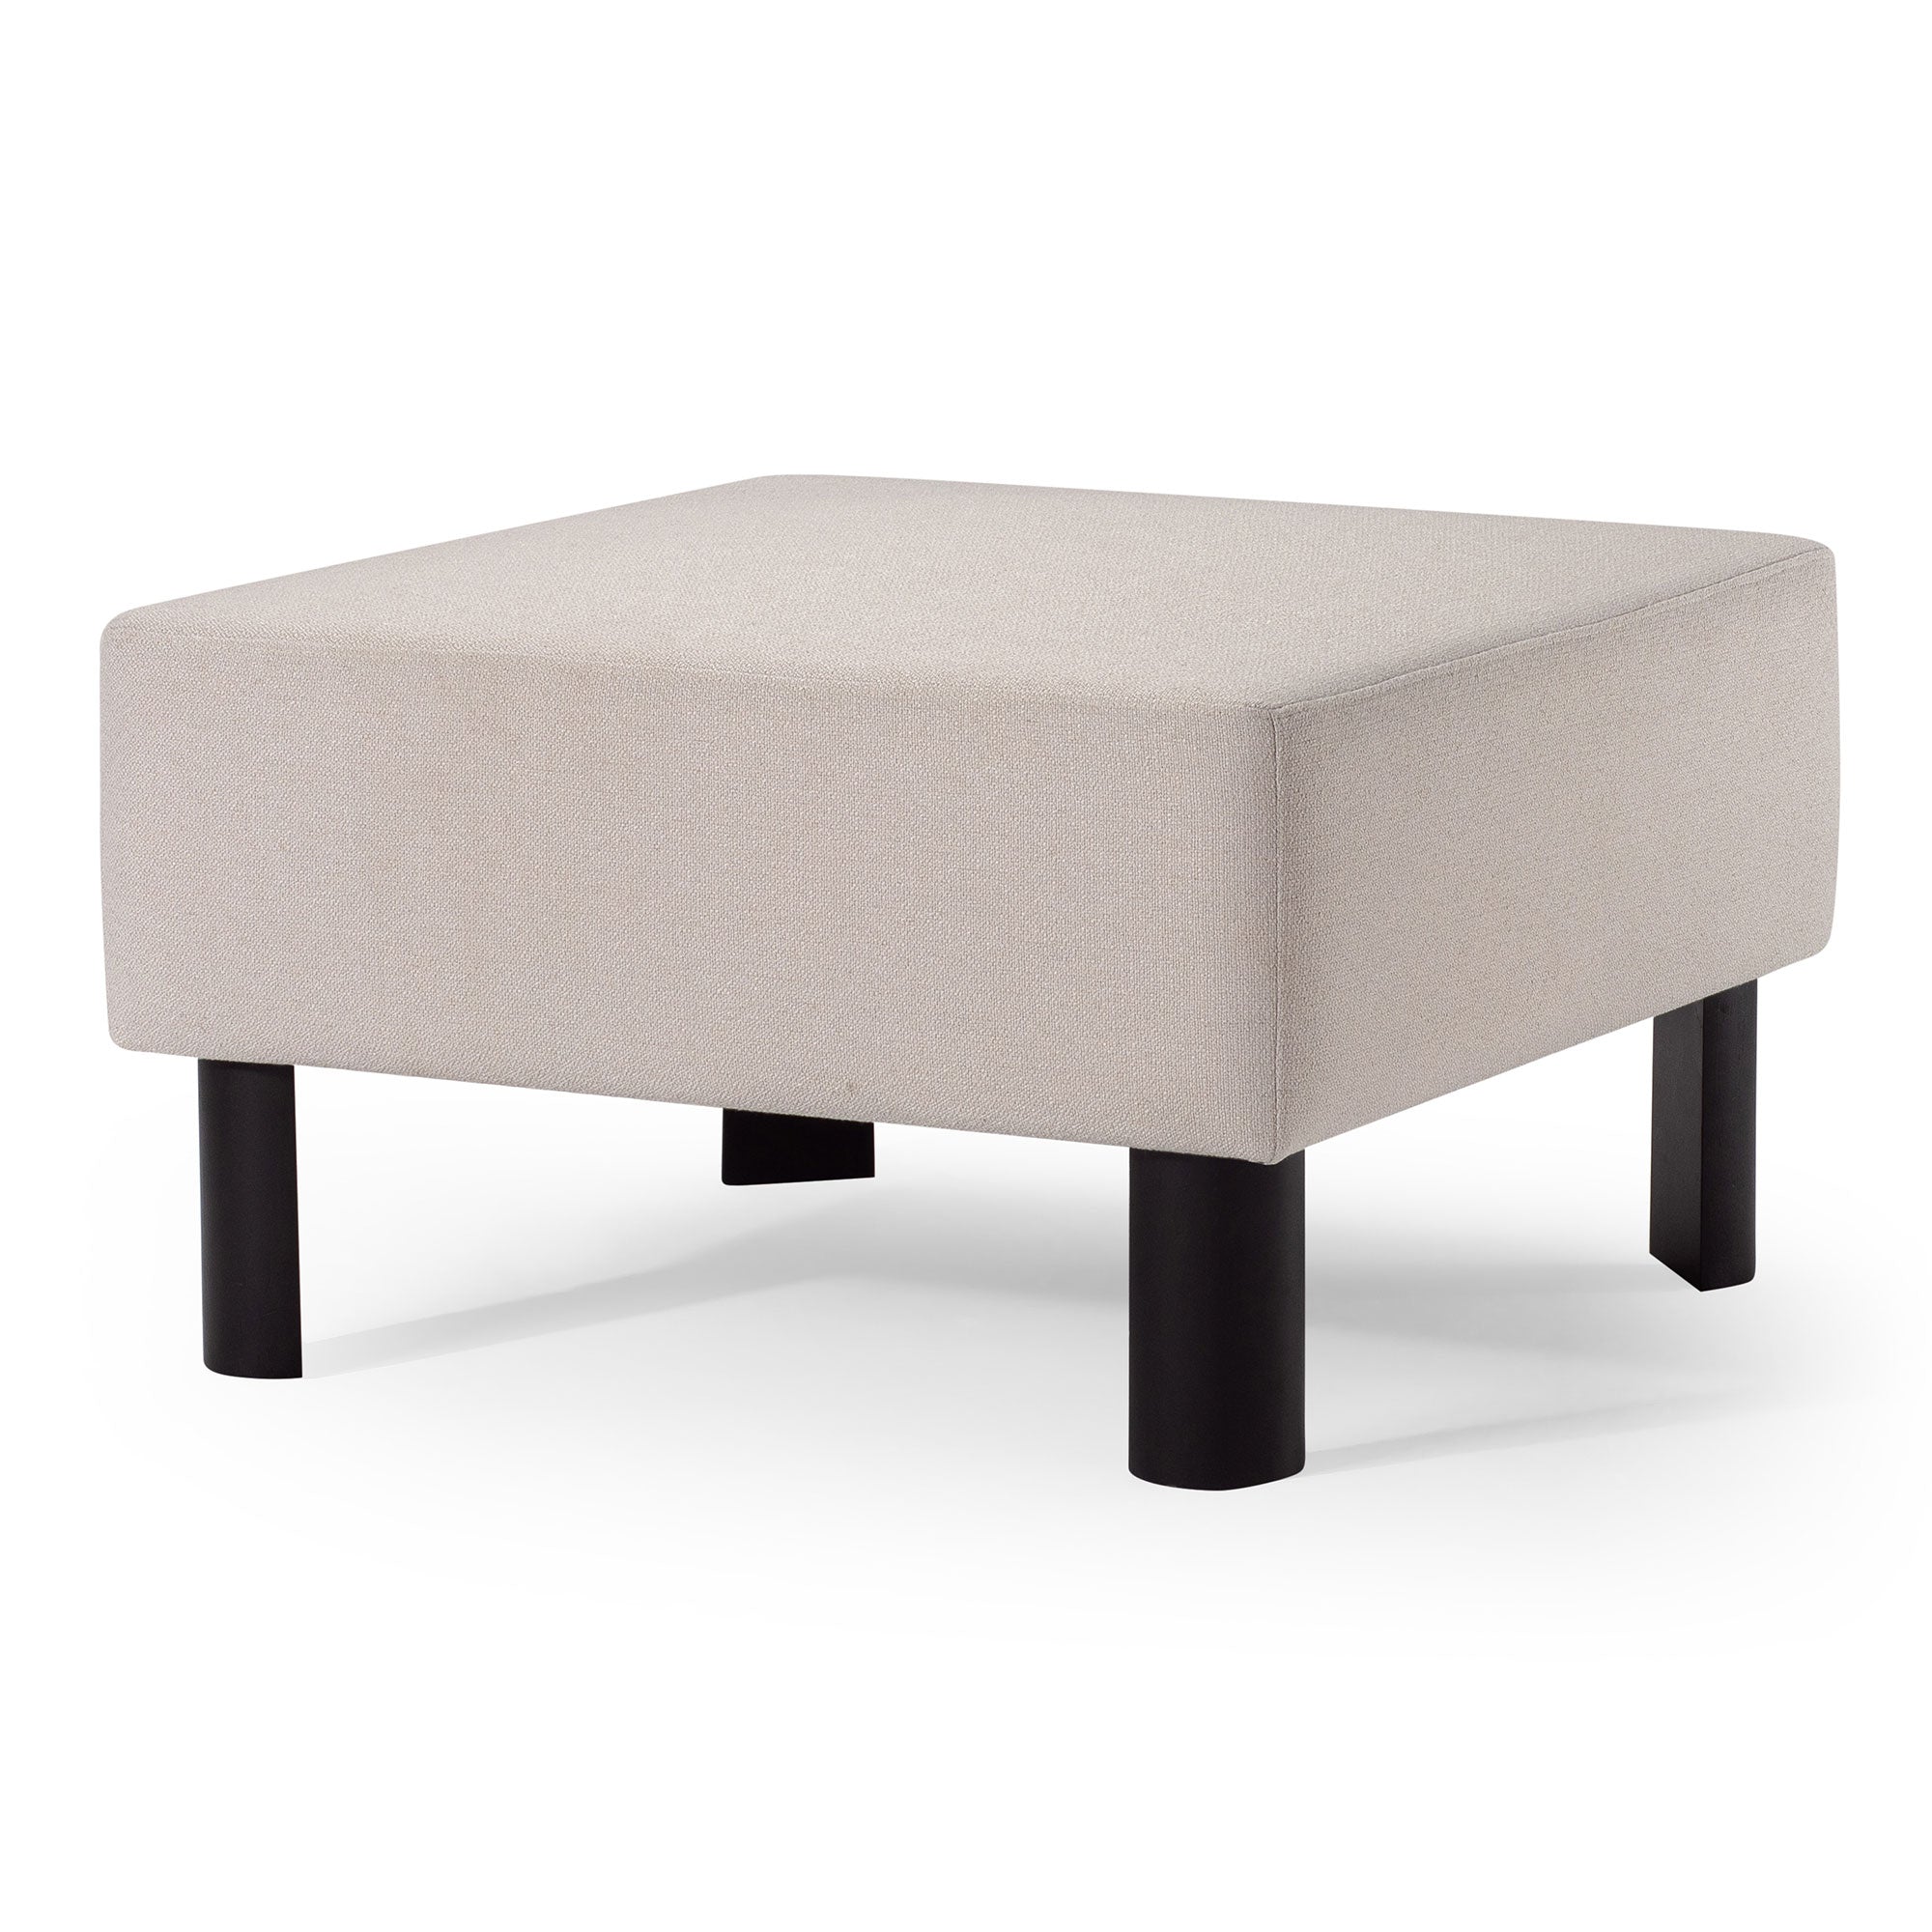 Lena Contemporary Upholstered Ottoman with Refined Black Wood Finish in Ottomans & Benches by Maven Lane